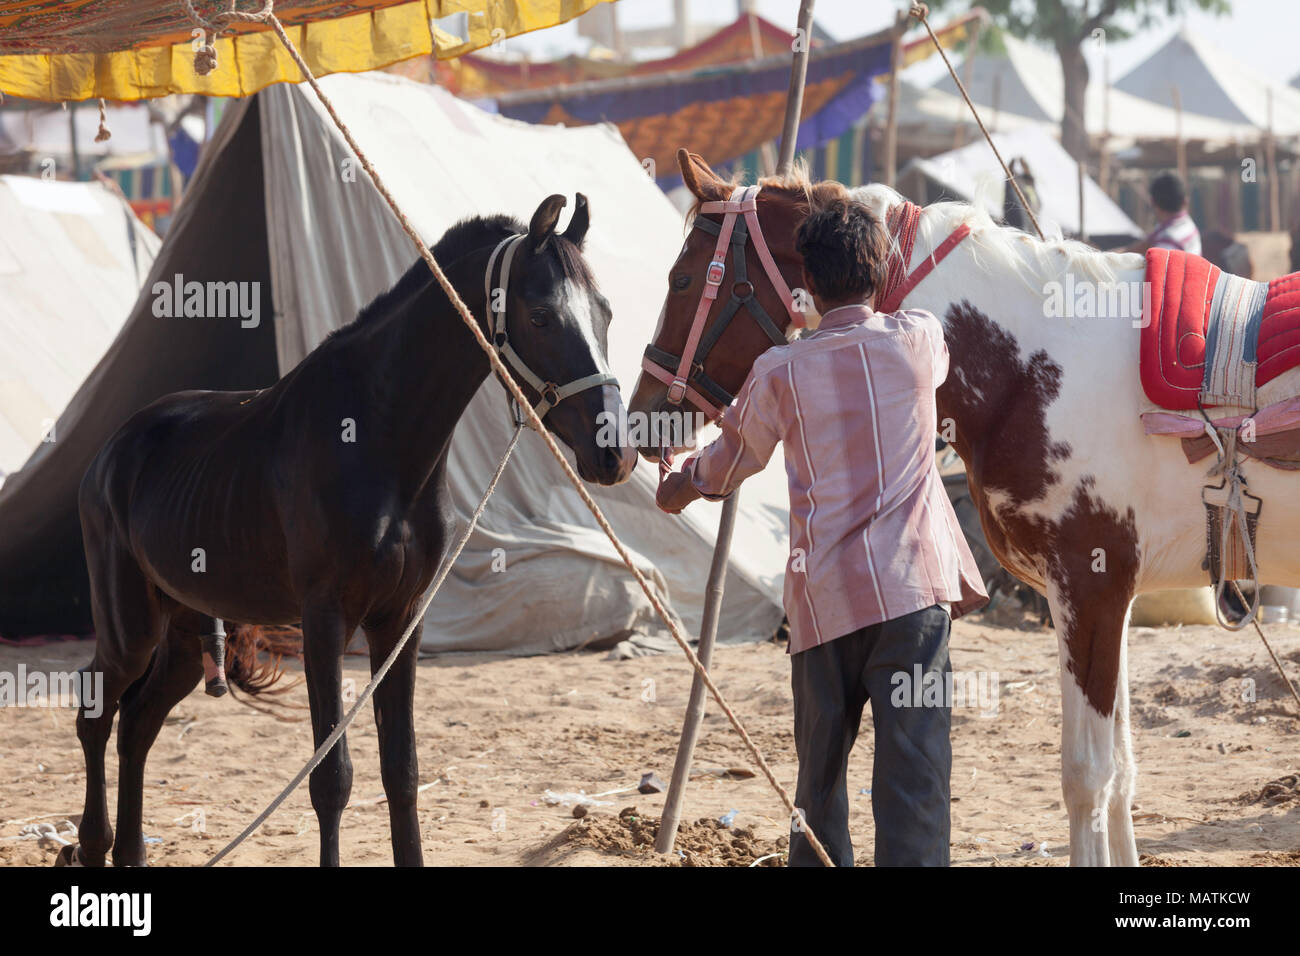 Two Marwari horses, a bay foal and coloured adult, tethered by some tents being handled by a man at the Pushkar Camel Fair, Pushkar, Rajasthan, India. Stock Photo